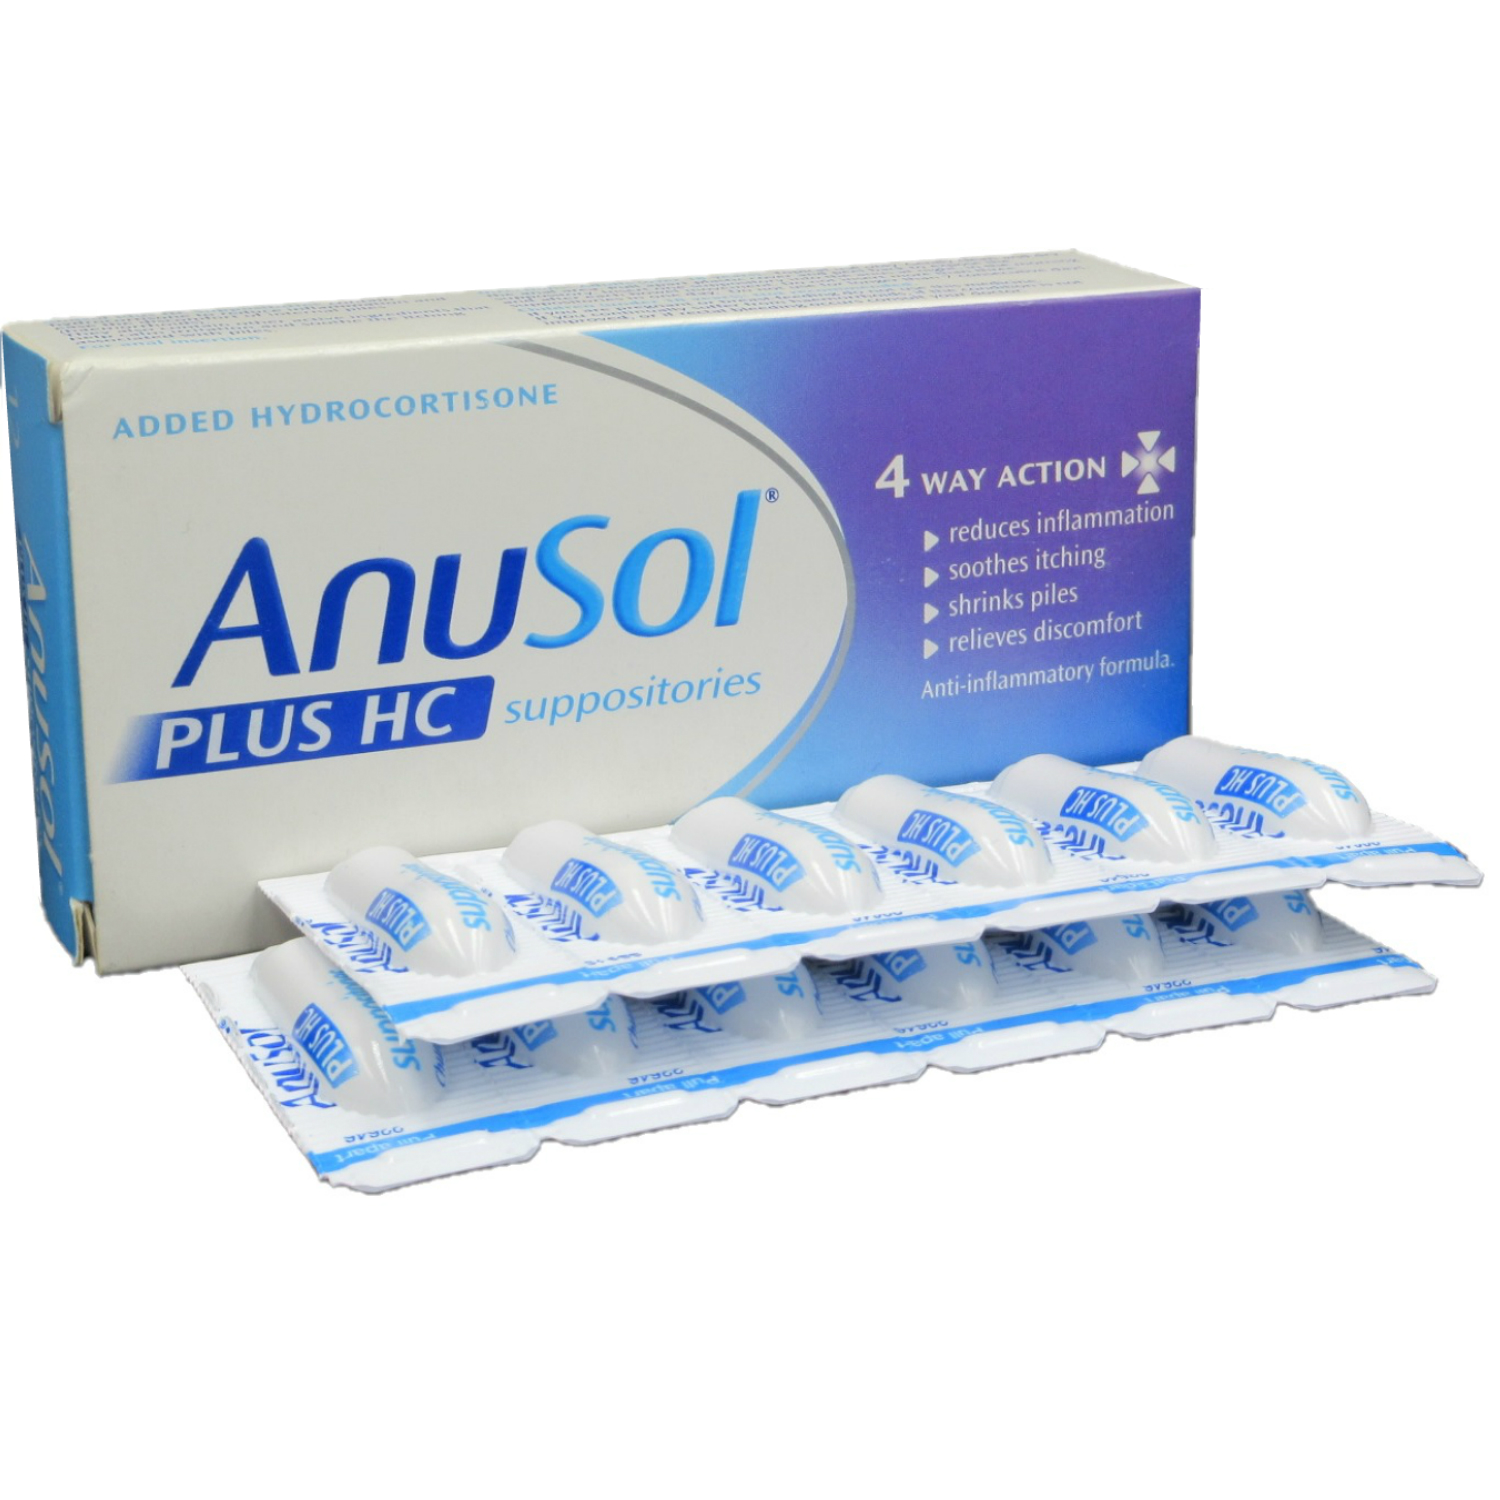 Anusol Plus HC Suppositories help to relive the swelling, itch and irritation of internal piles (haemorrhoids) and anal itching.